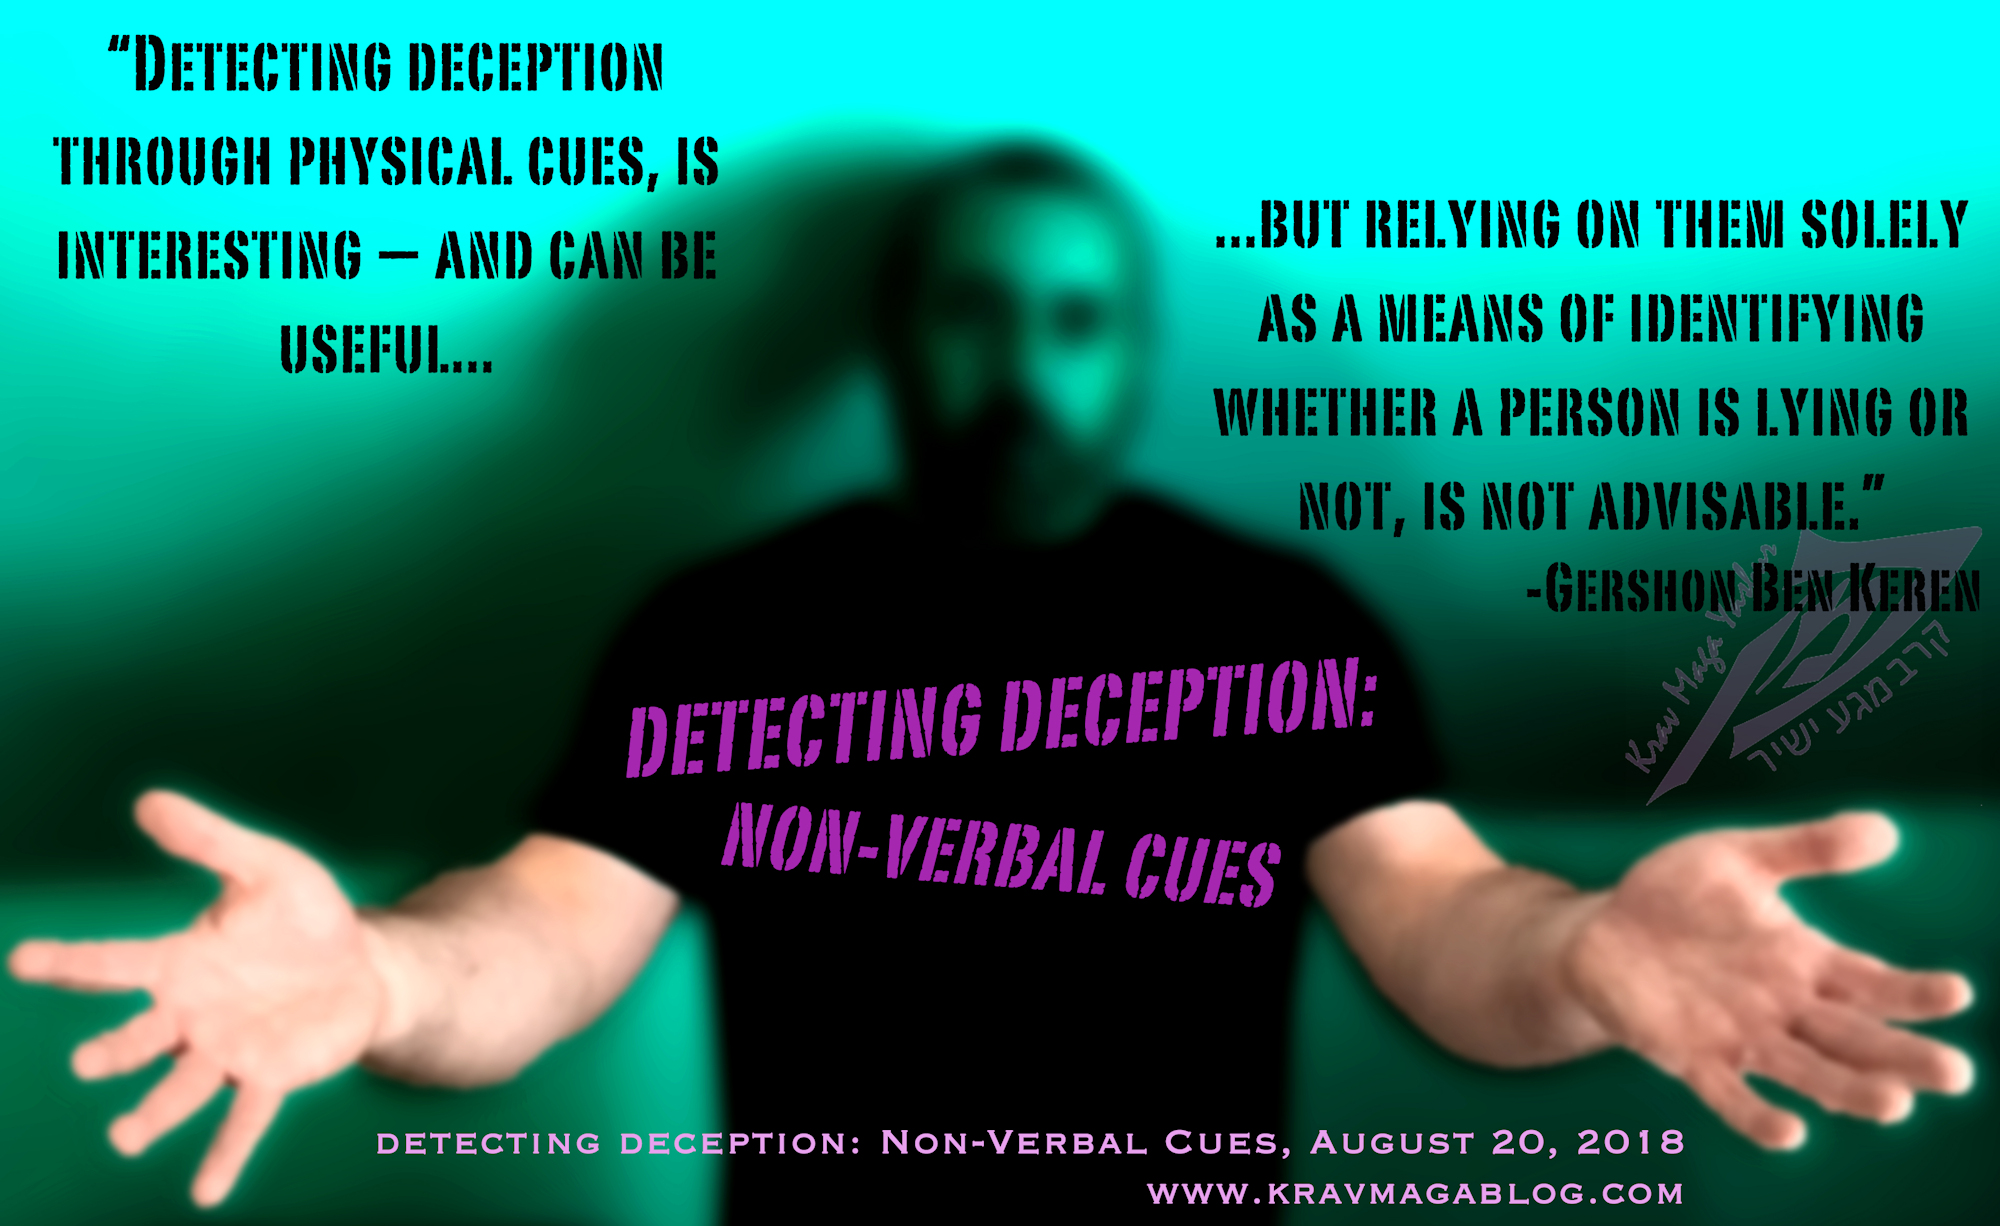 Blog About Detecting Deception: Non-Verbal Cues